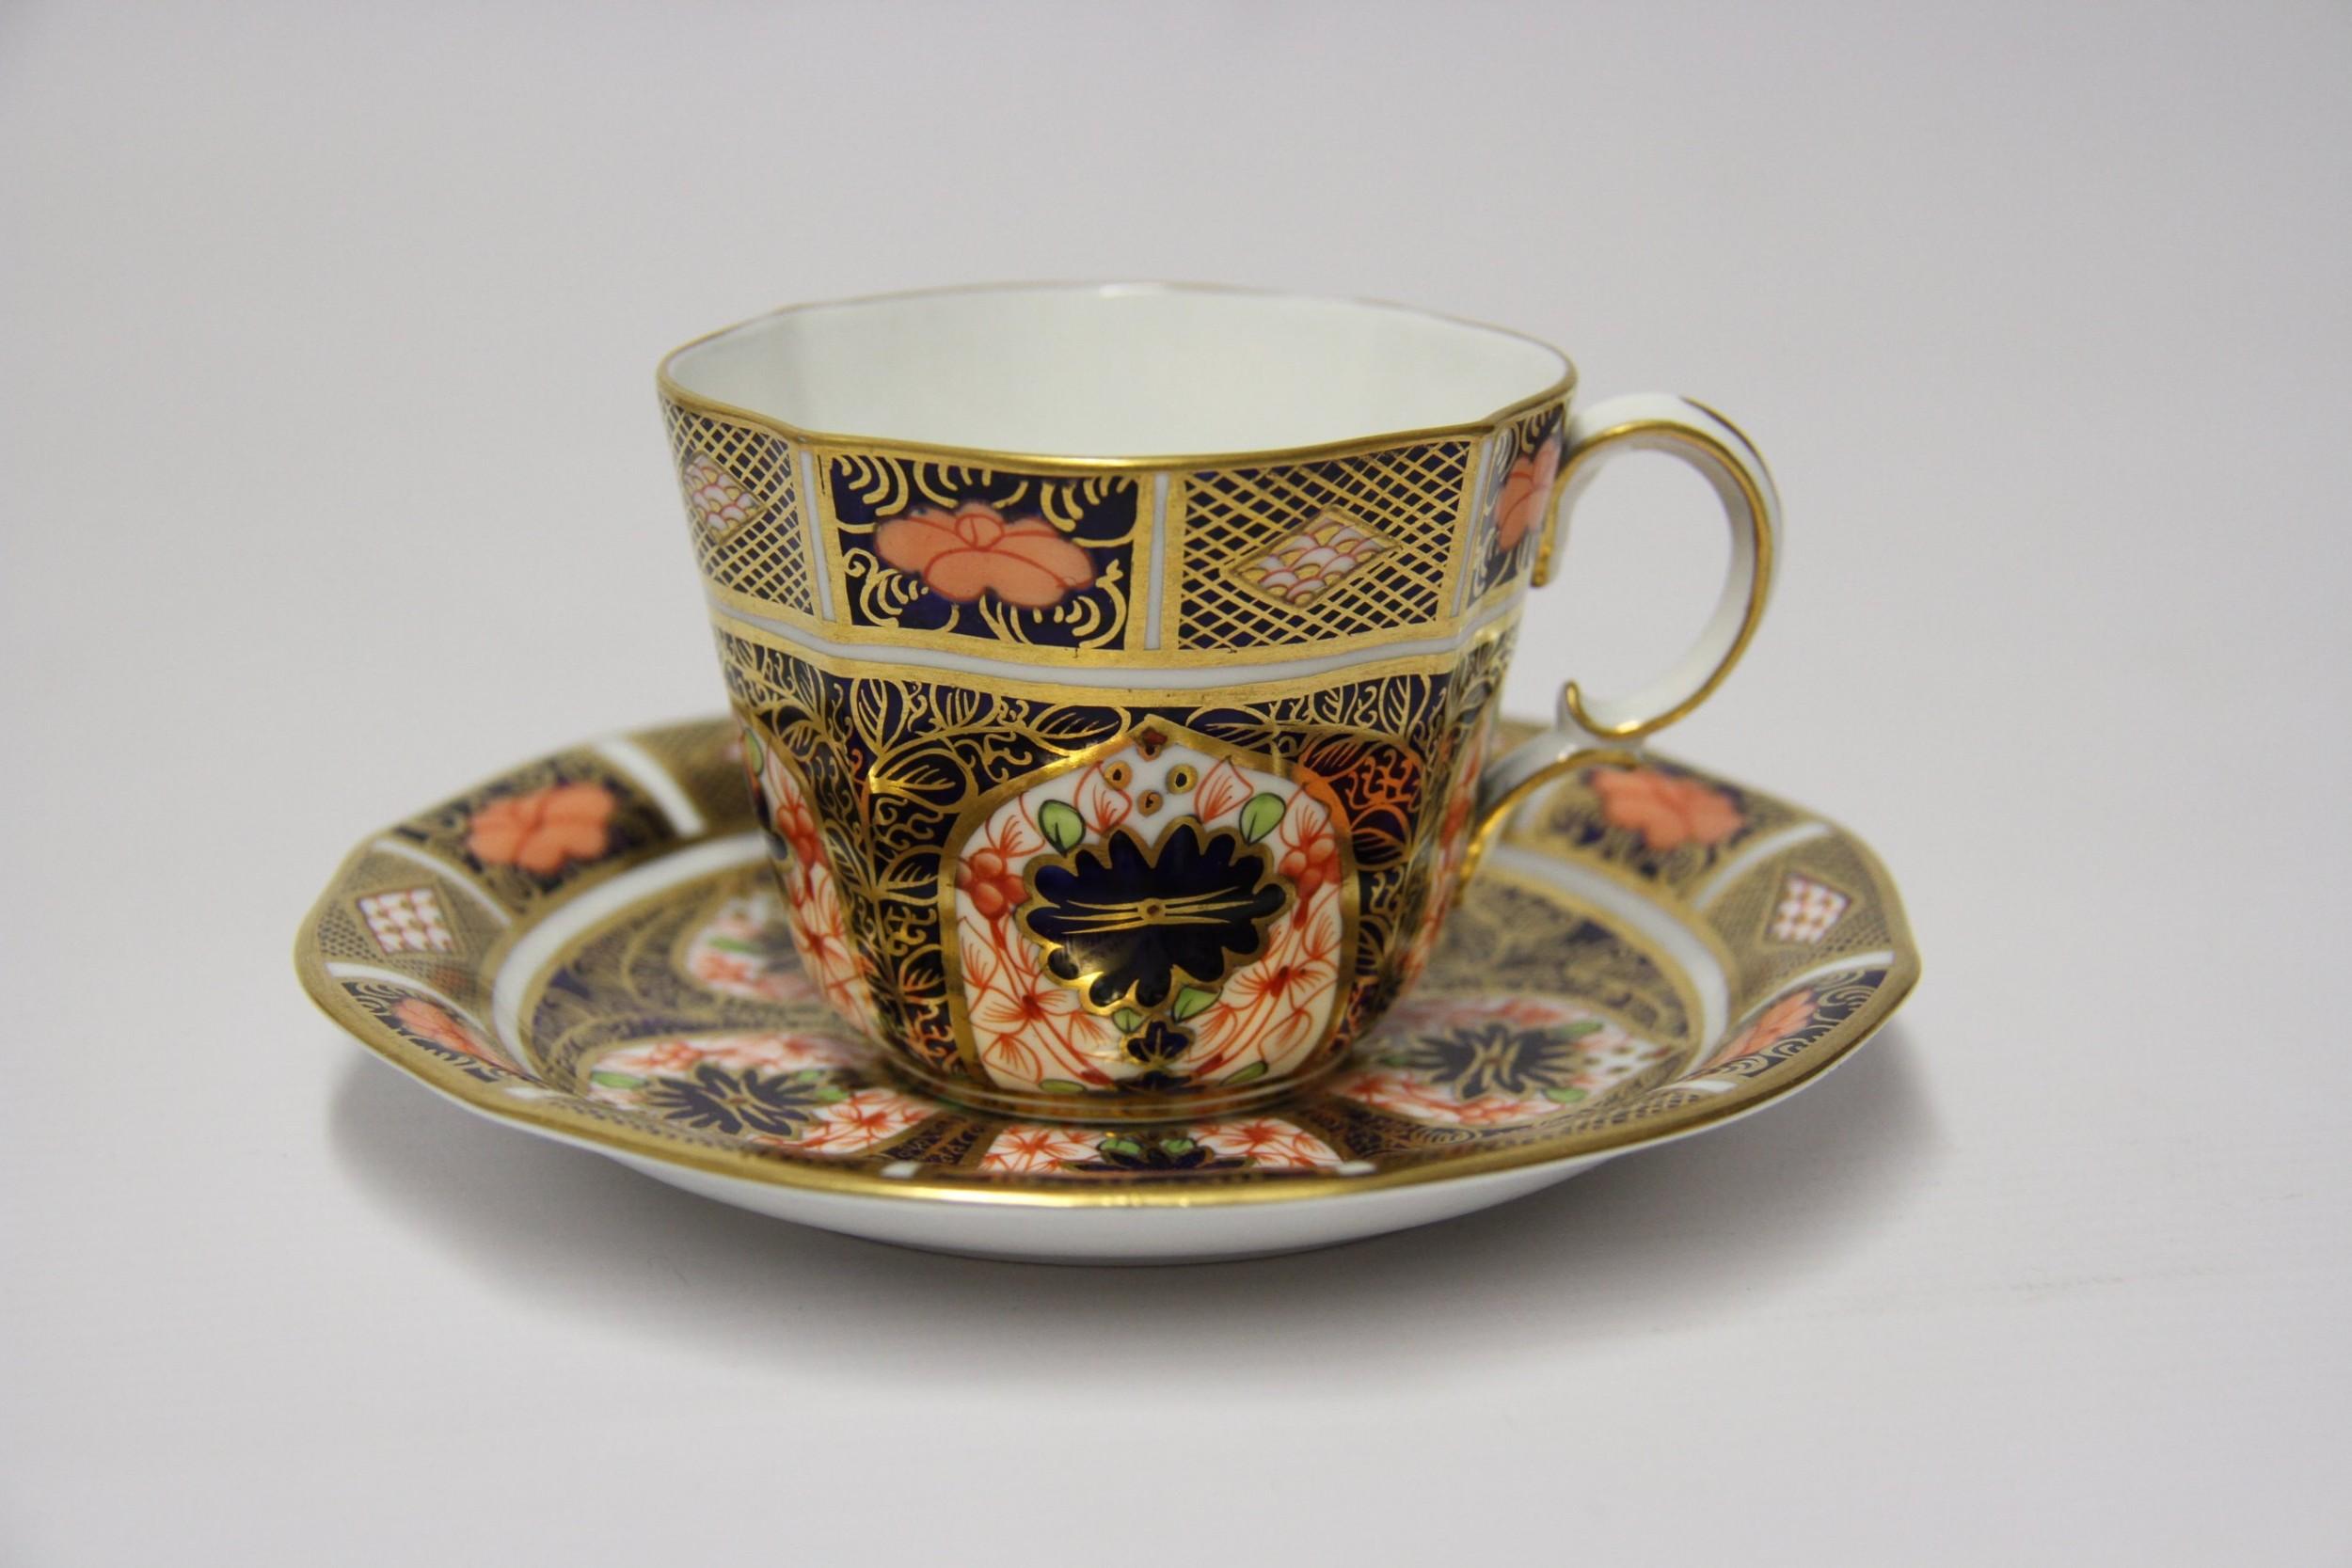 This Crown Derby tea set is in exceptional condition. It is a set of six hand painted and gilded tea cups and saucers with a decorative Imari design using a rich palette of colors. The tea set was made at the Royal Crown Derby factory in 1910-1911